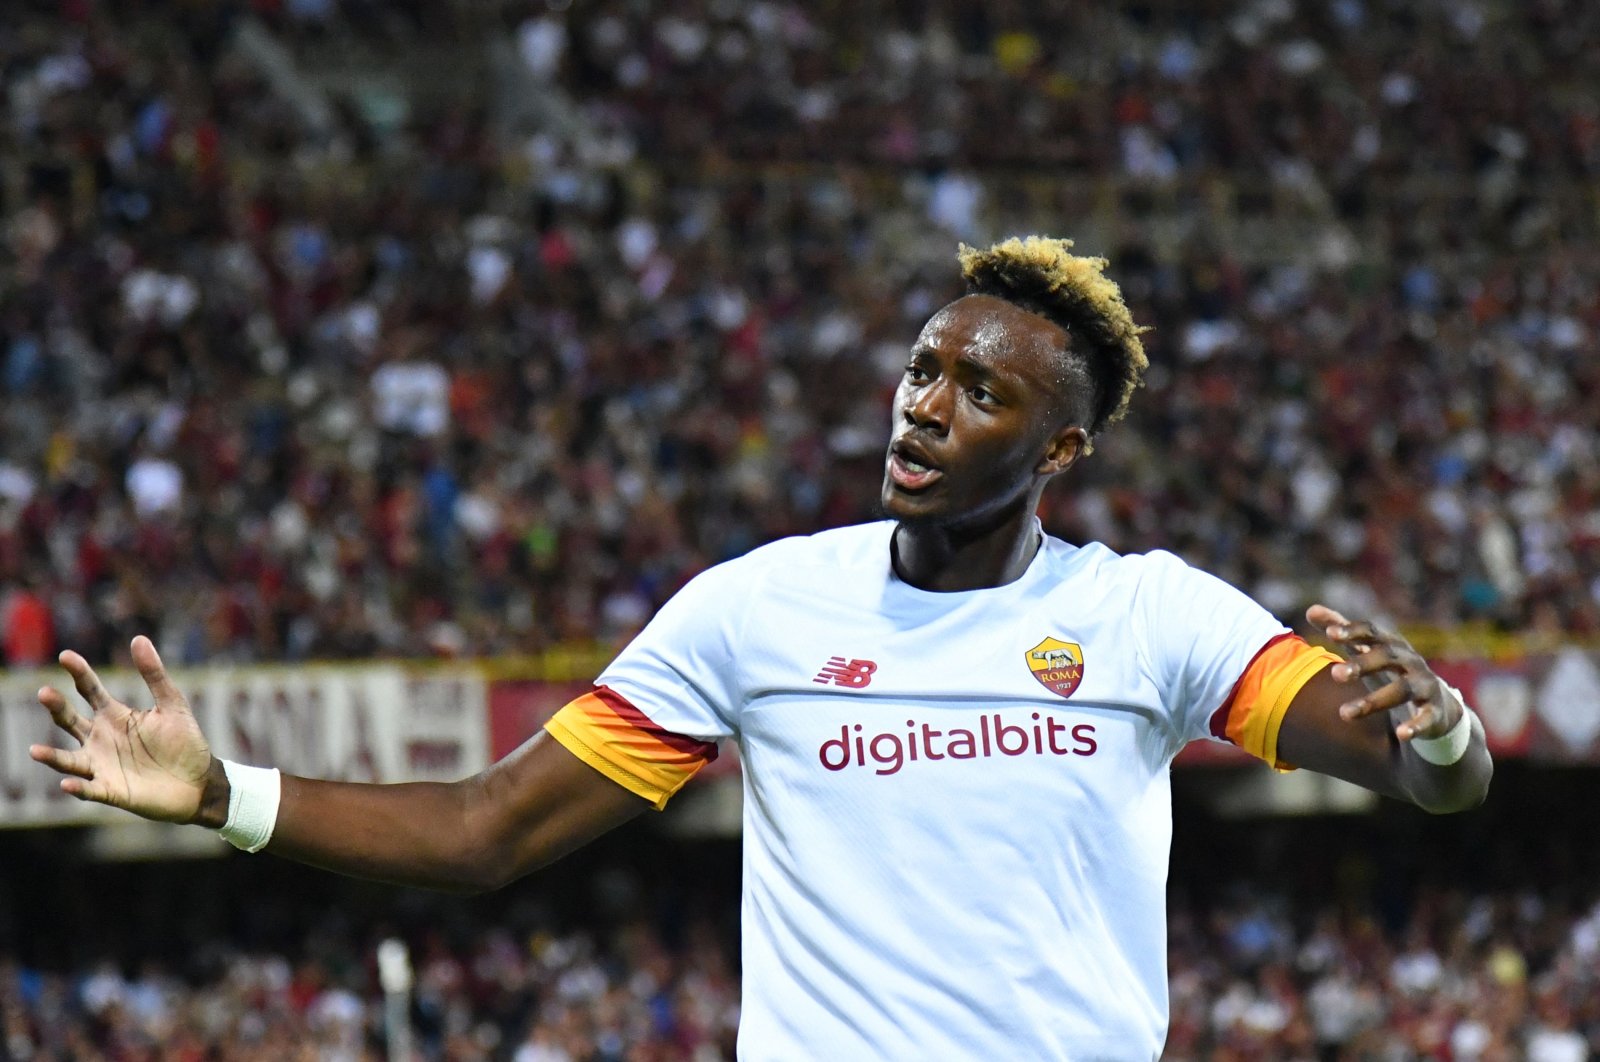 Roma's Tammy Abraham celebrates a goal in a Serie A football match against Roma at Arechi stadium in Salerno, Italy, Aug. 29, 2021. (AFP Photo)